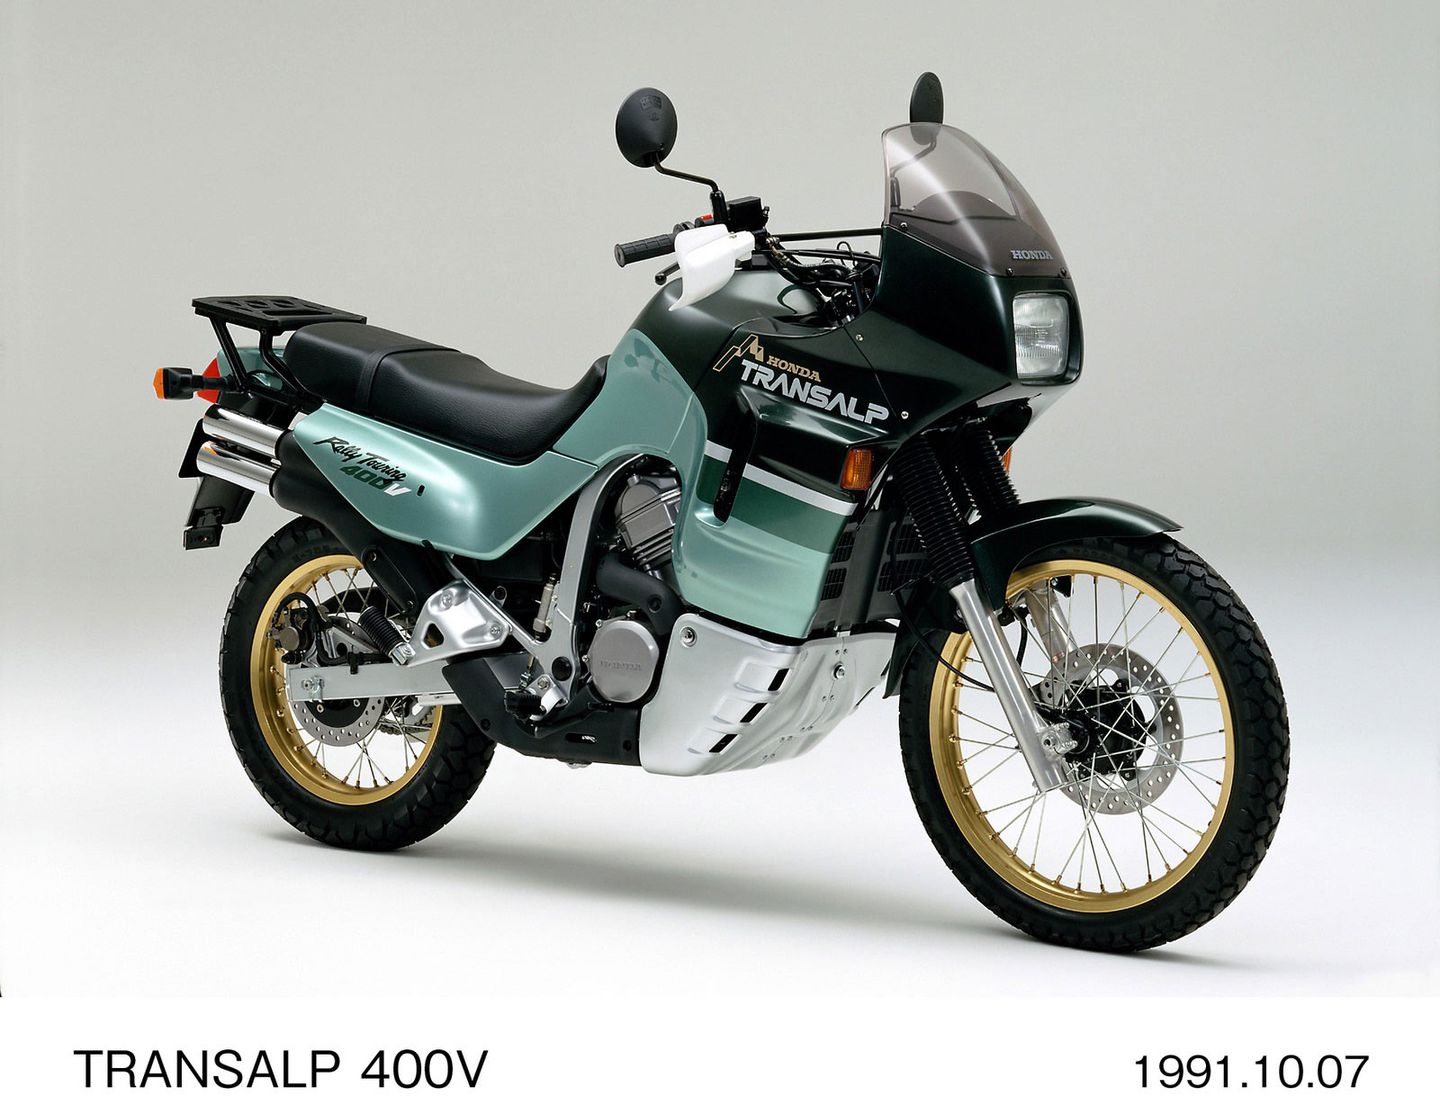 A side view of Honda's Transalp motorcycles, available between 1991 and 2011